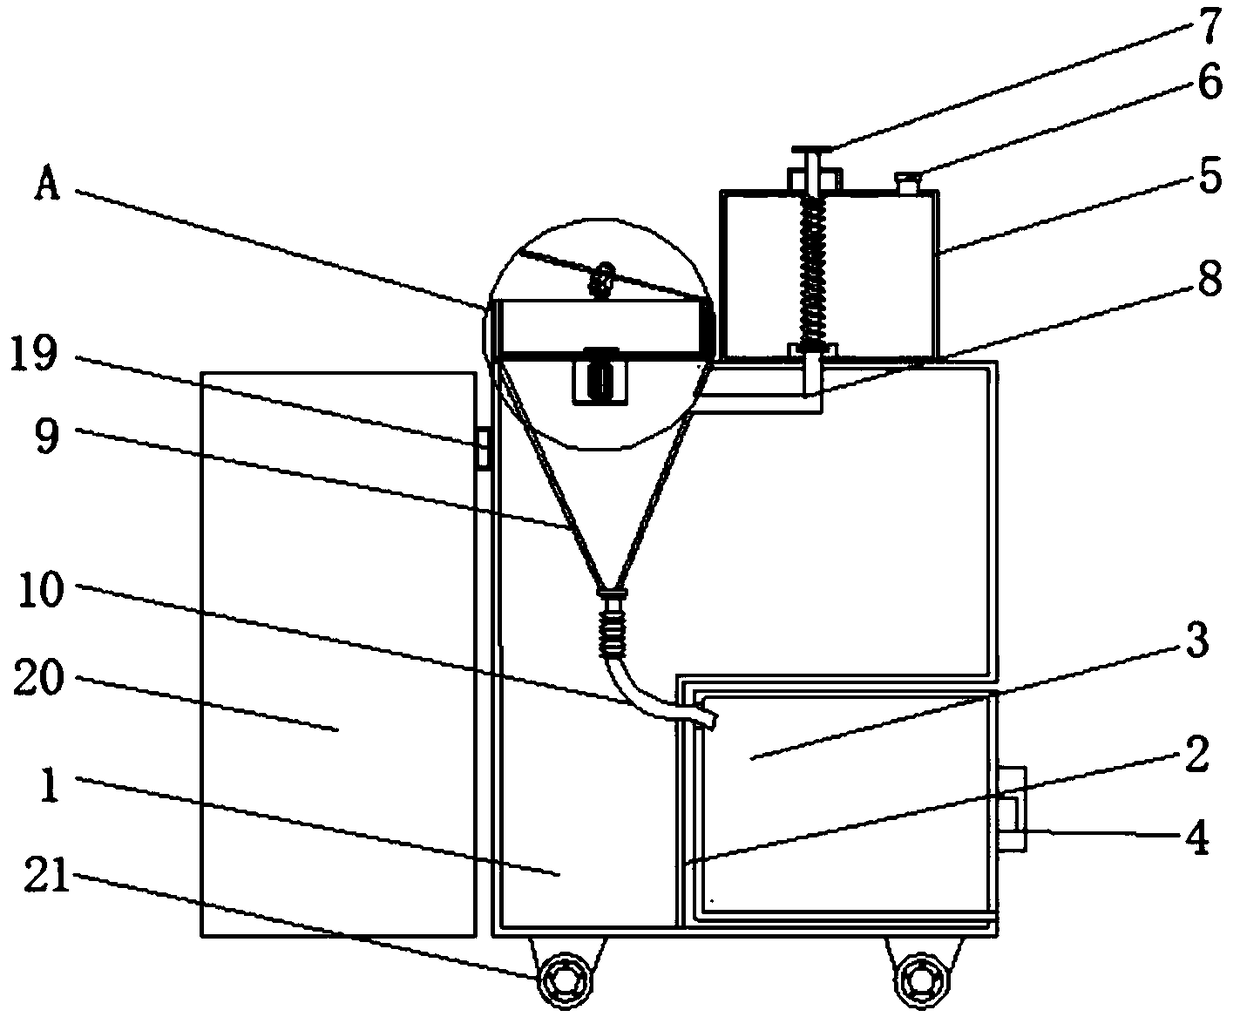 Solid-liquid separating medical garbage collecting device